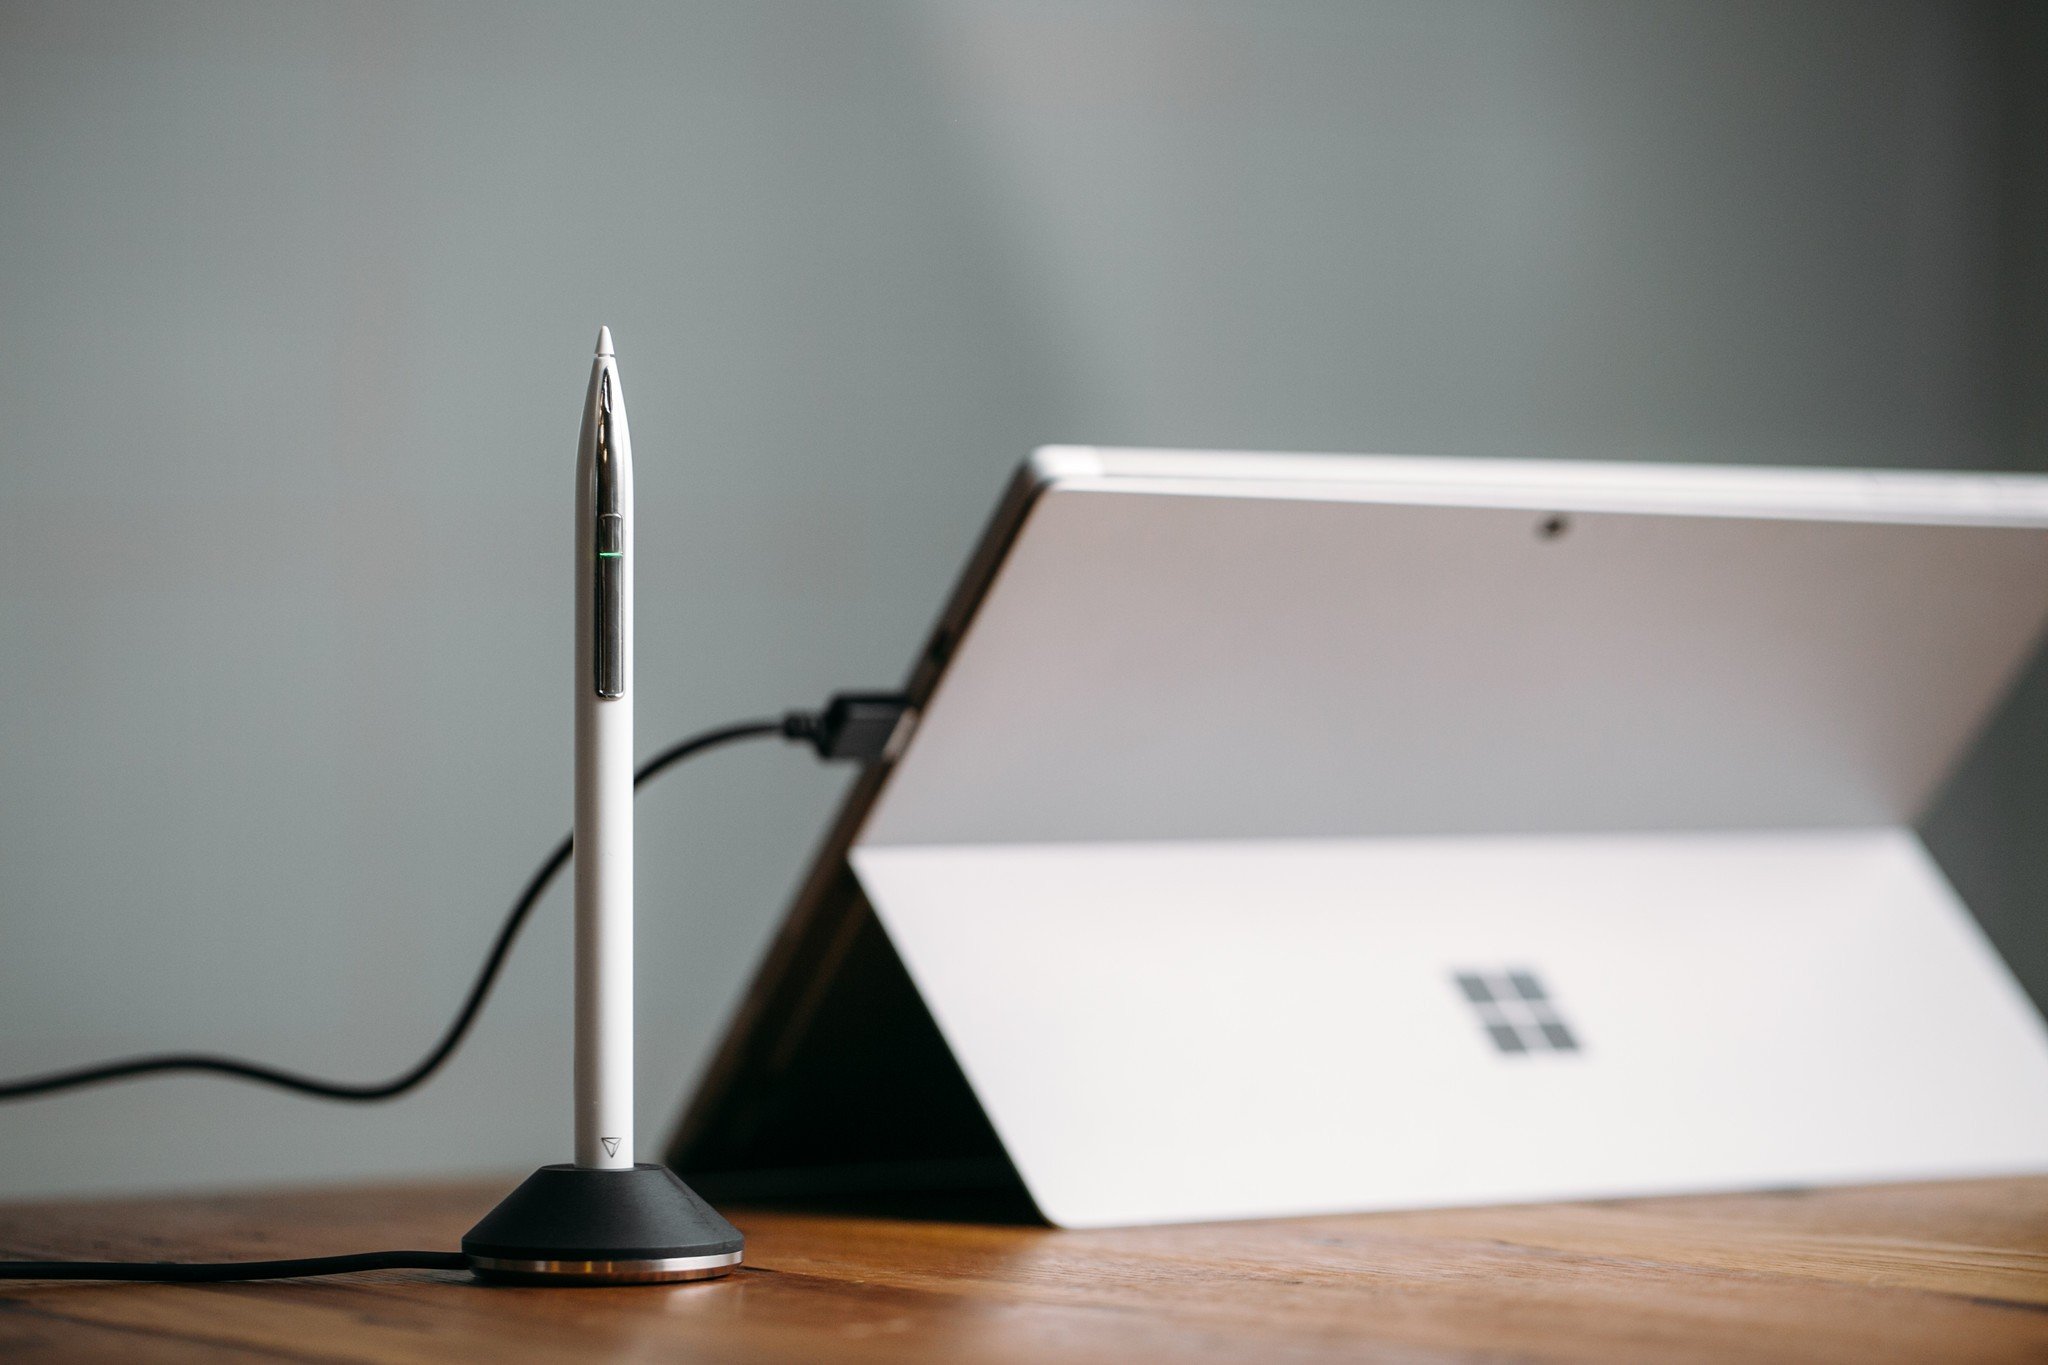 Adonit brings its INK Pro Windows stylus to the UK for £80